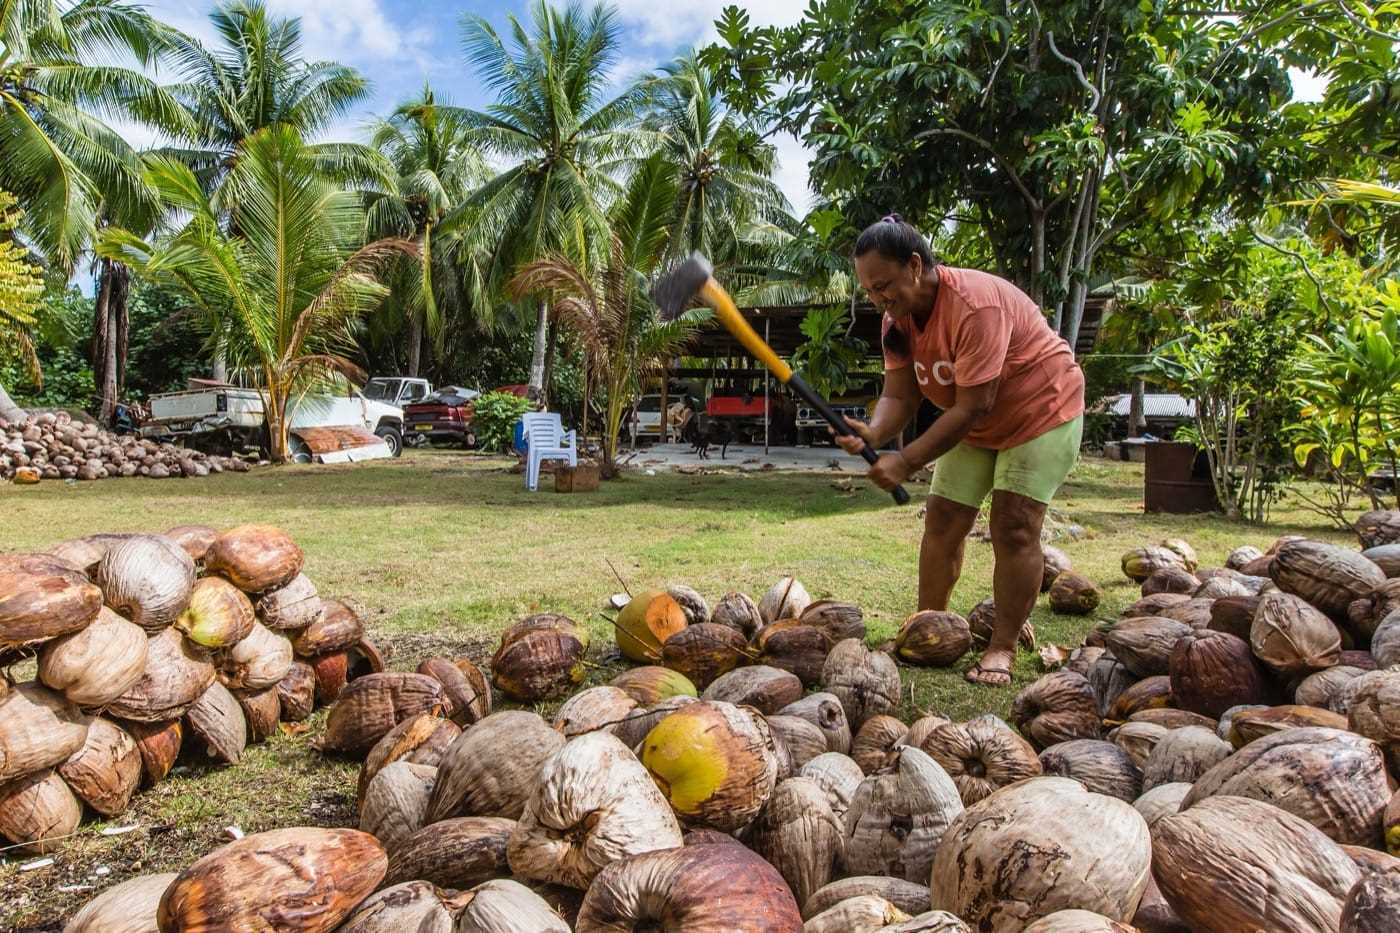 A man taking an axe to a large pile of coconuts with a smile on his face